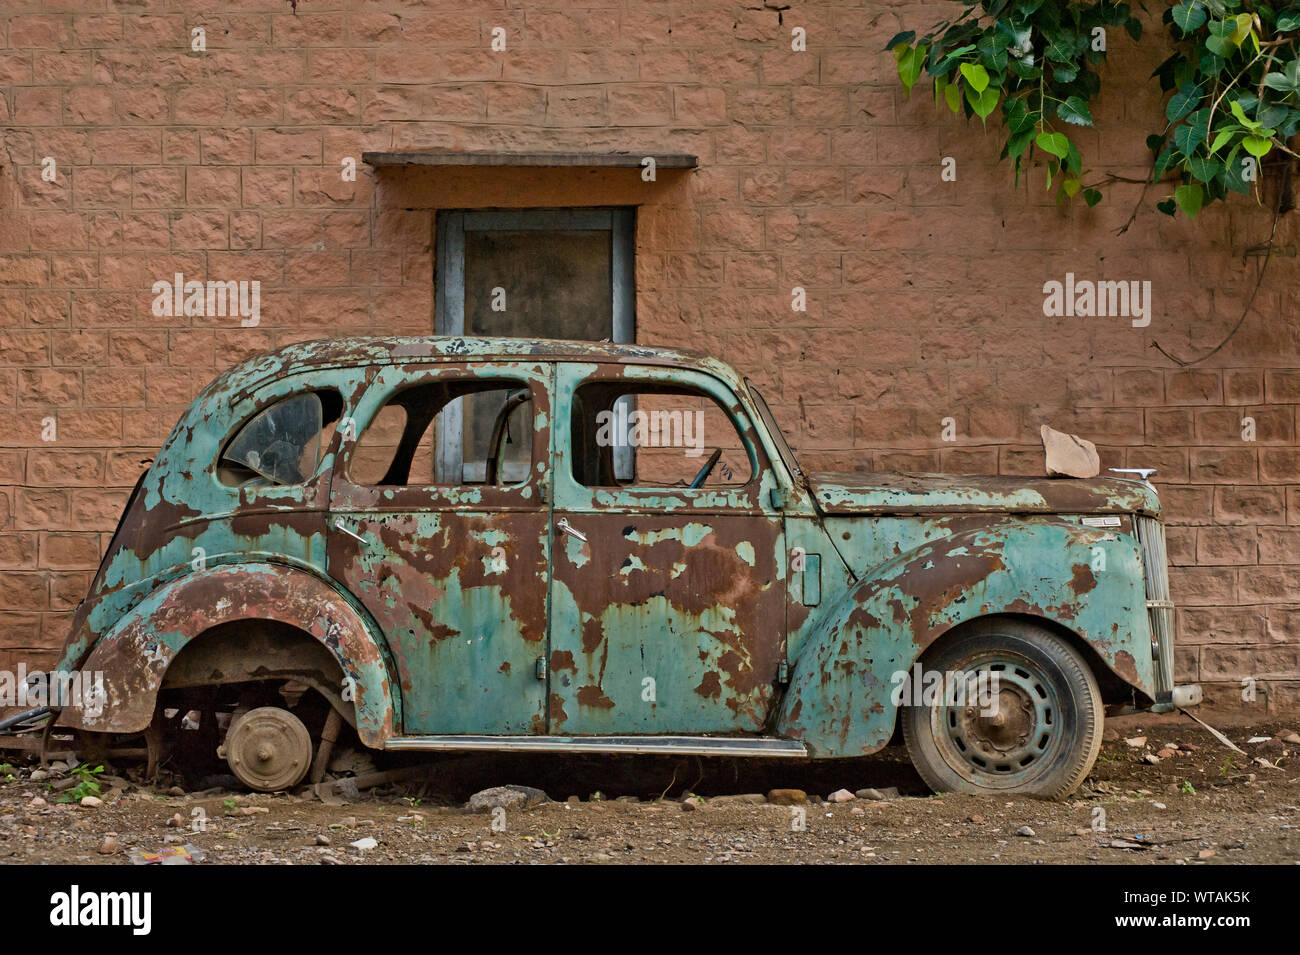 Abandoned old car in the streets Stock Photo